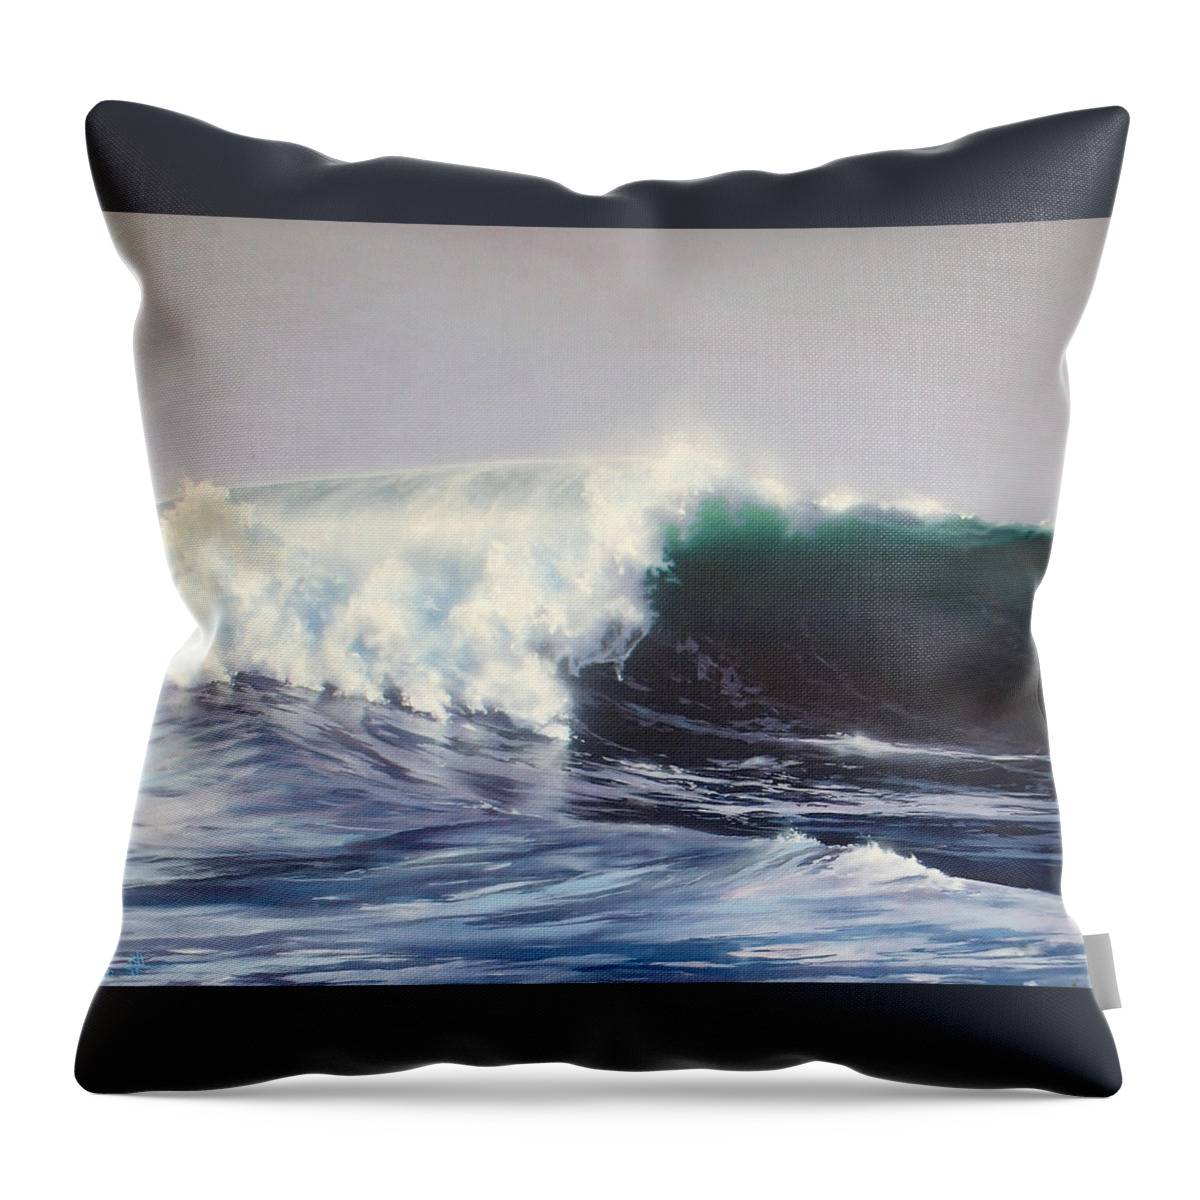 The Wedge Throw Pillow featuring the painting Wedge by Philip Fleischer